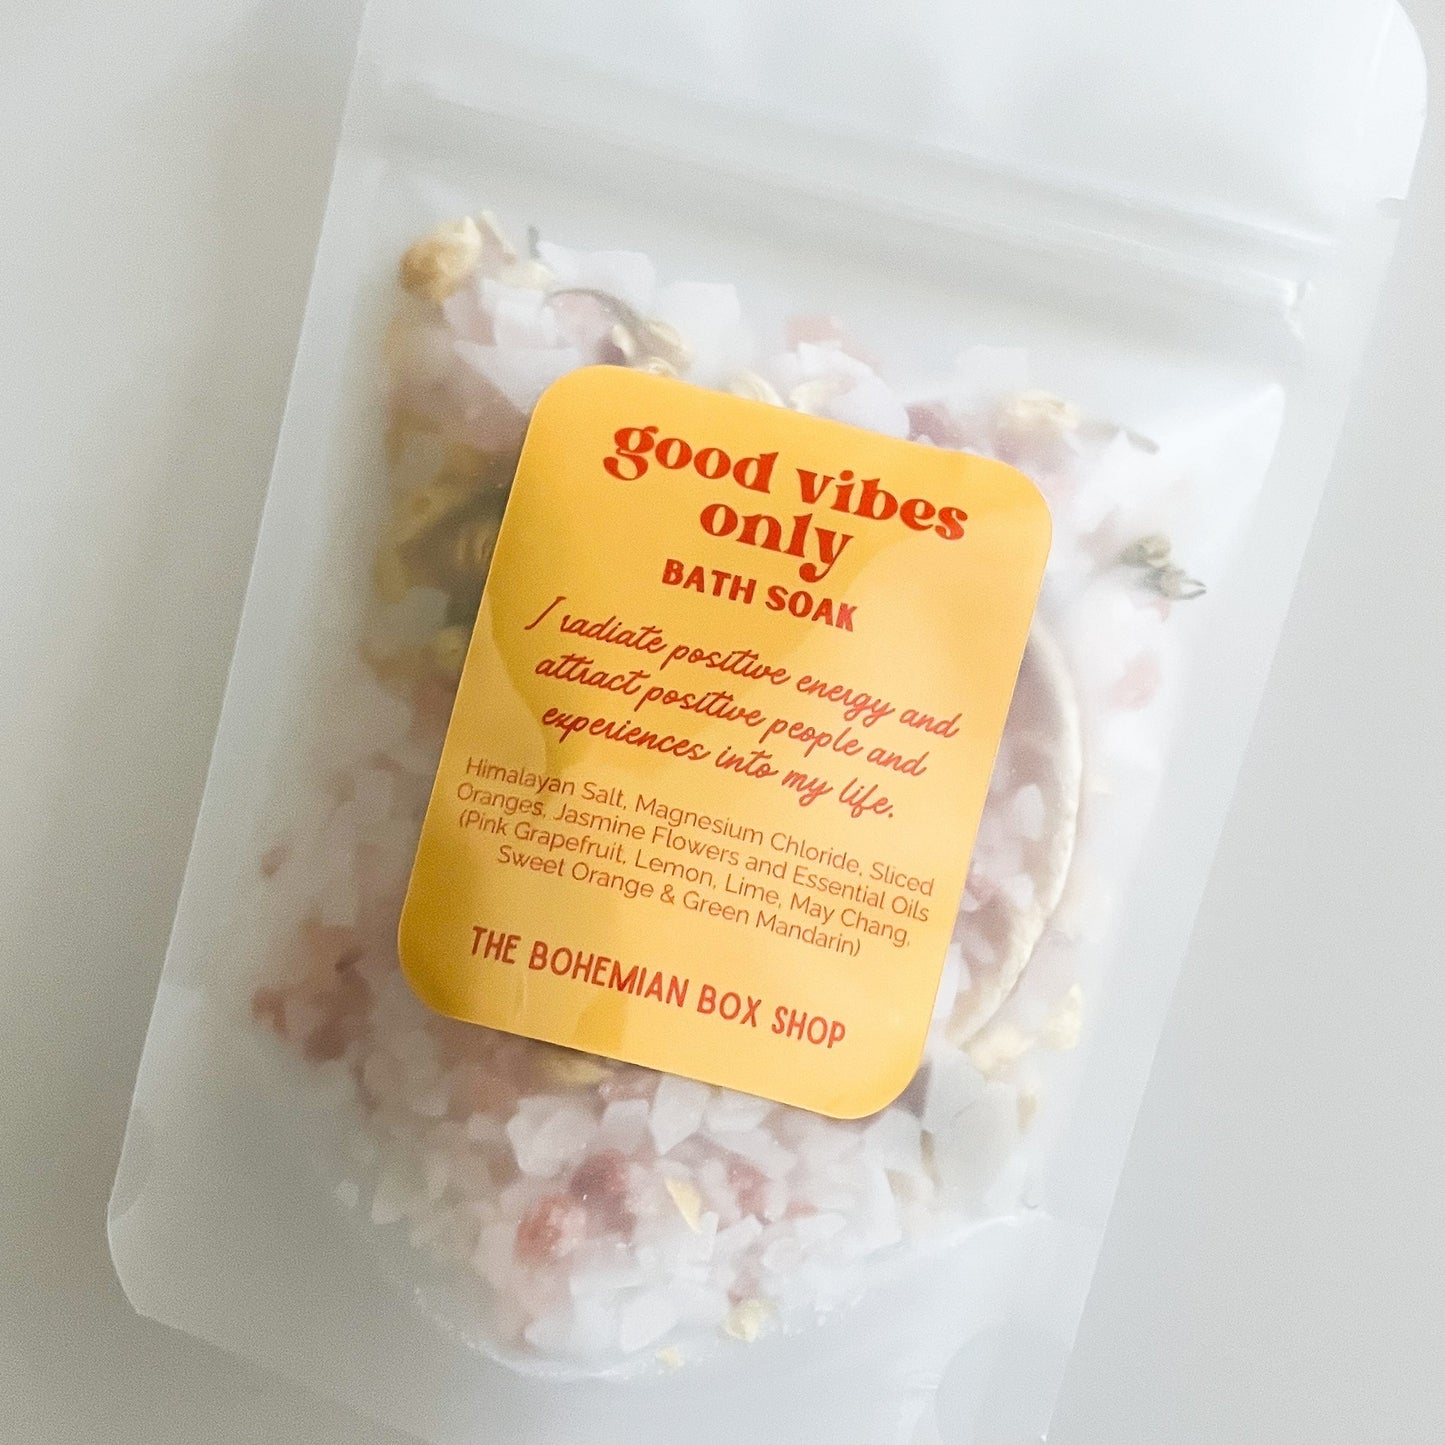 Good Vibes Only Bath Soak With Affirmation, yellow and orange label